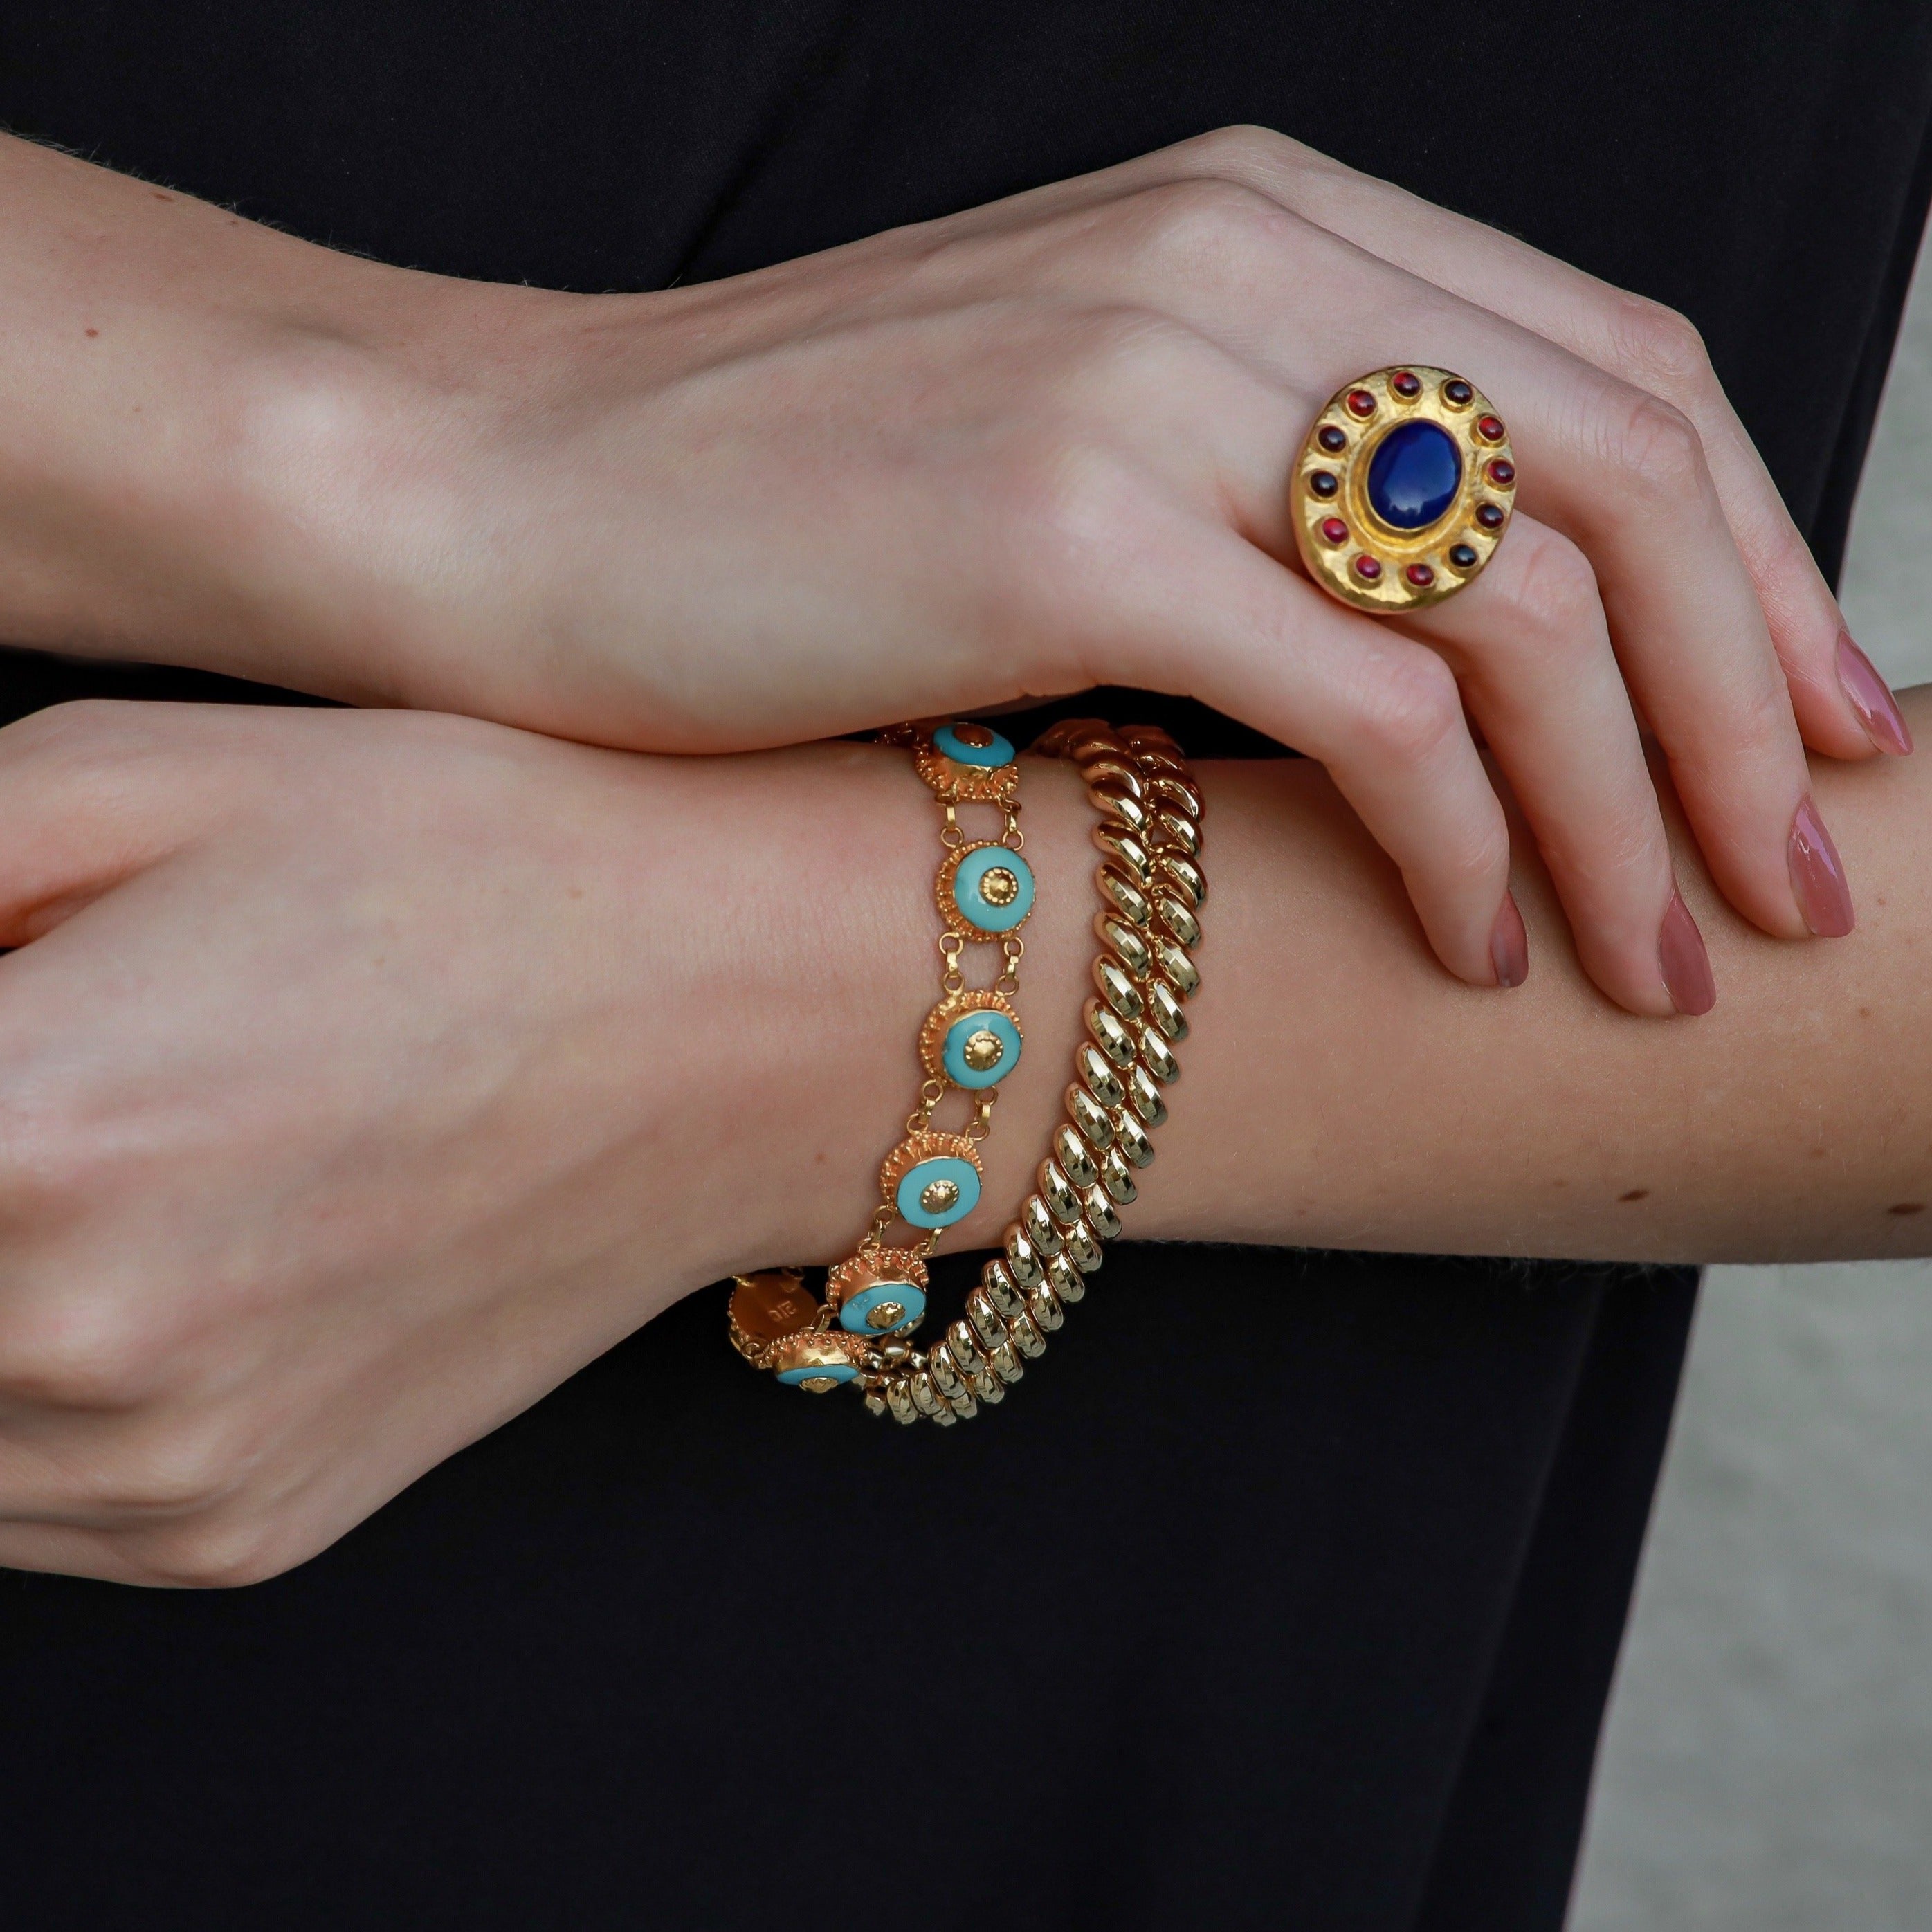 Vintage ring and bracelets worn on a woman’s hands.